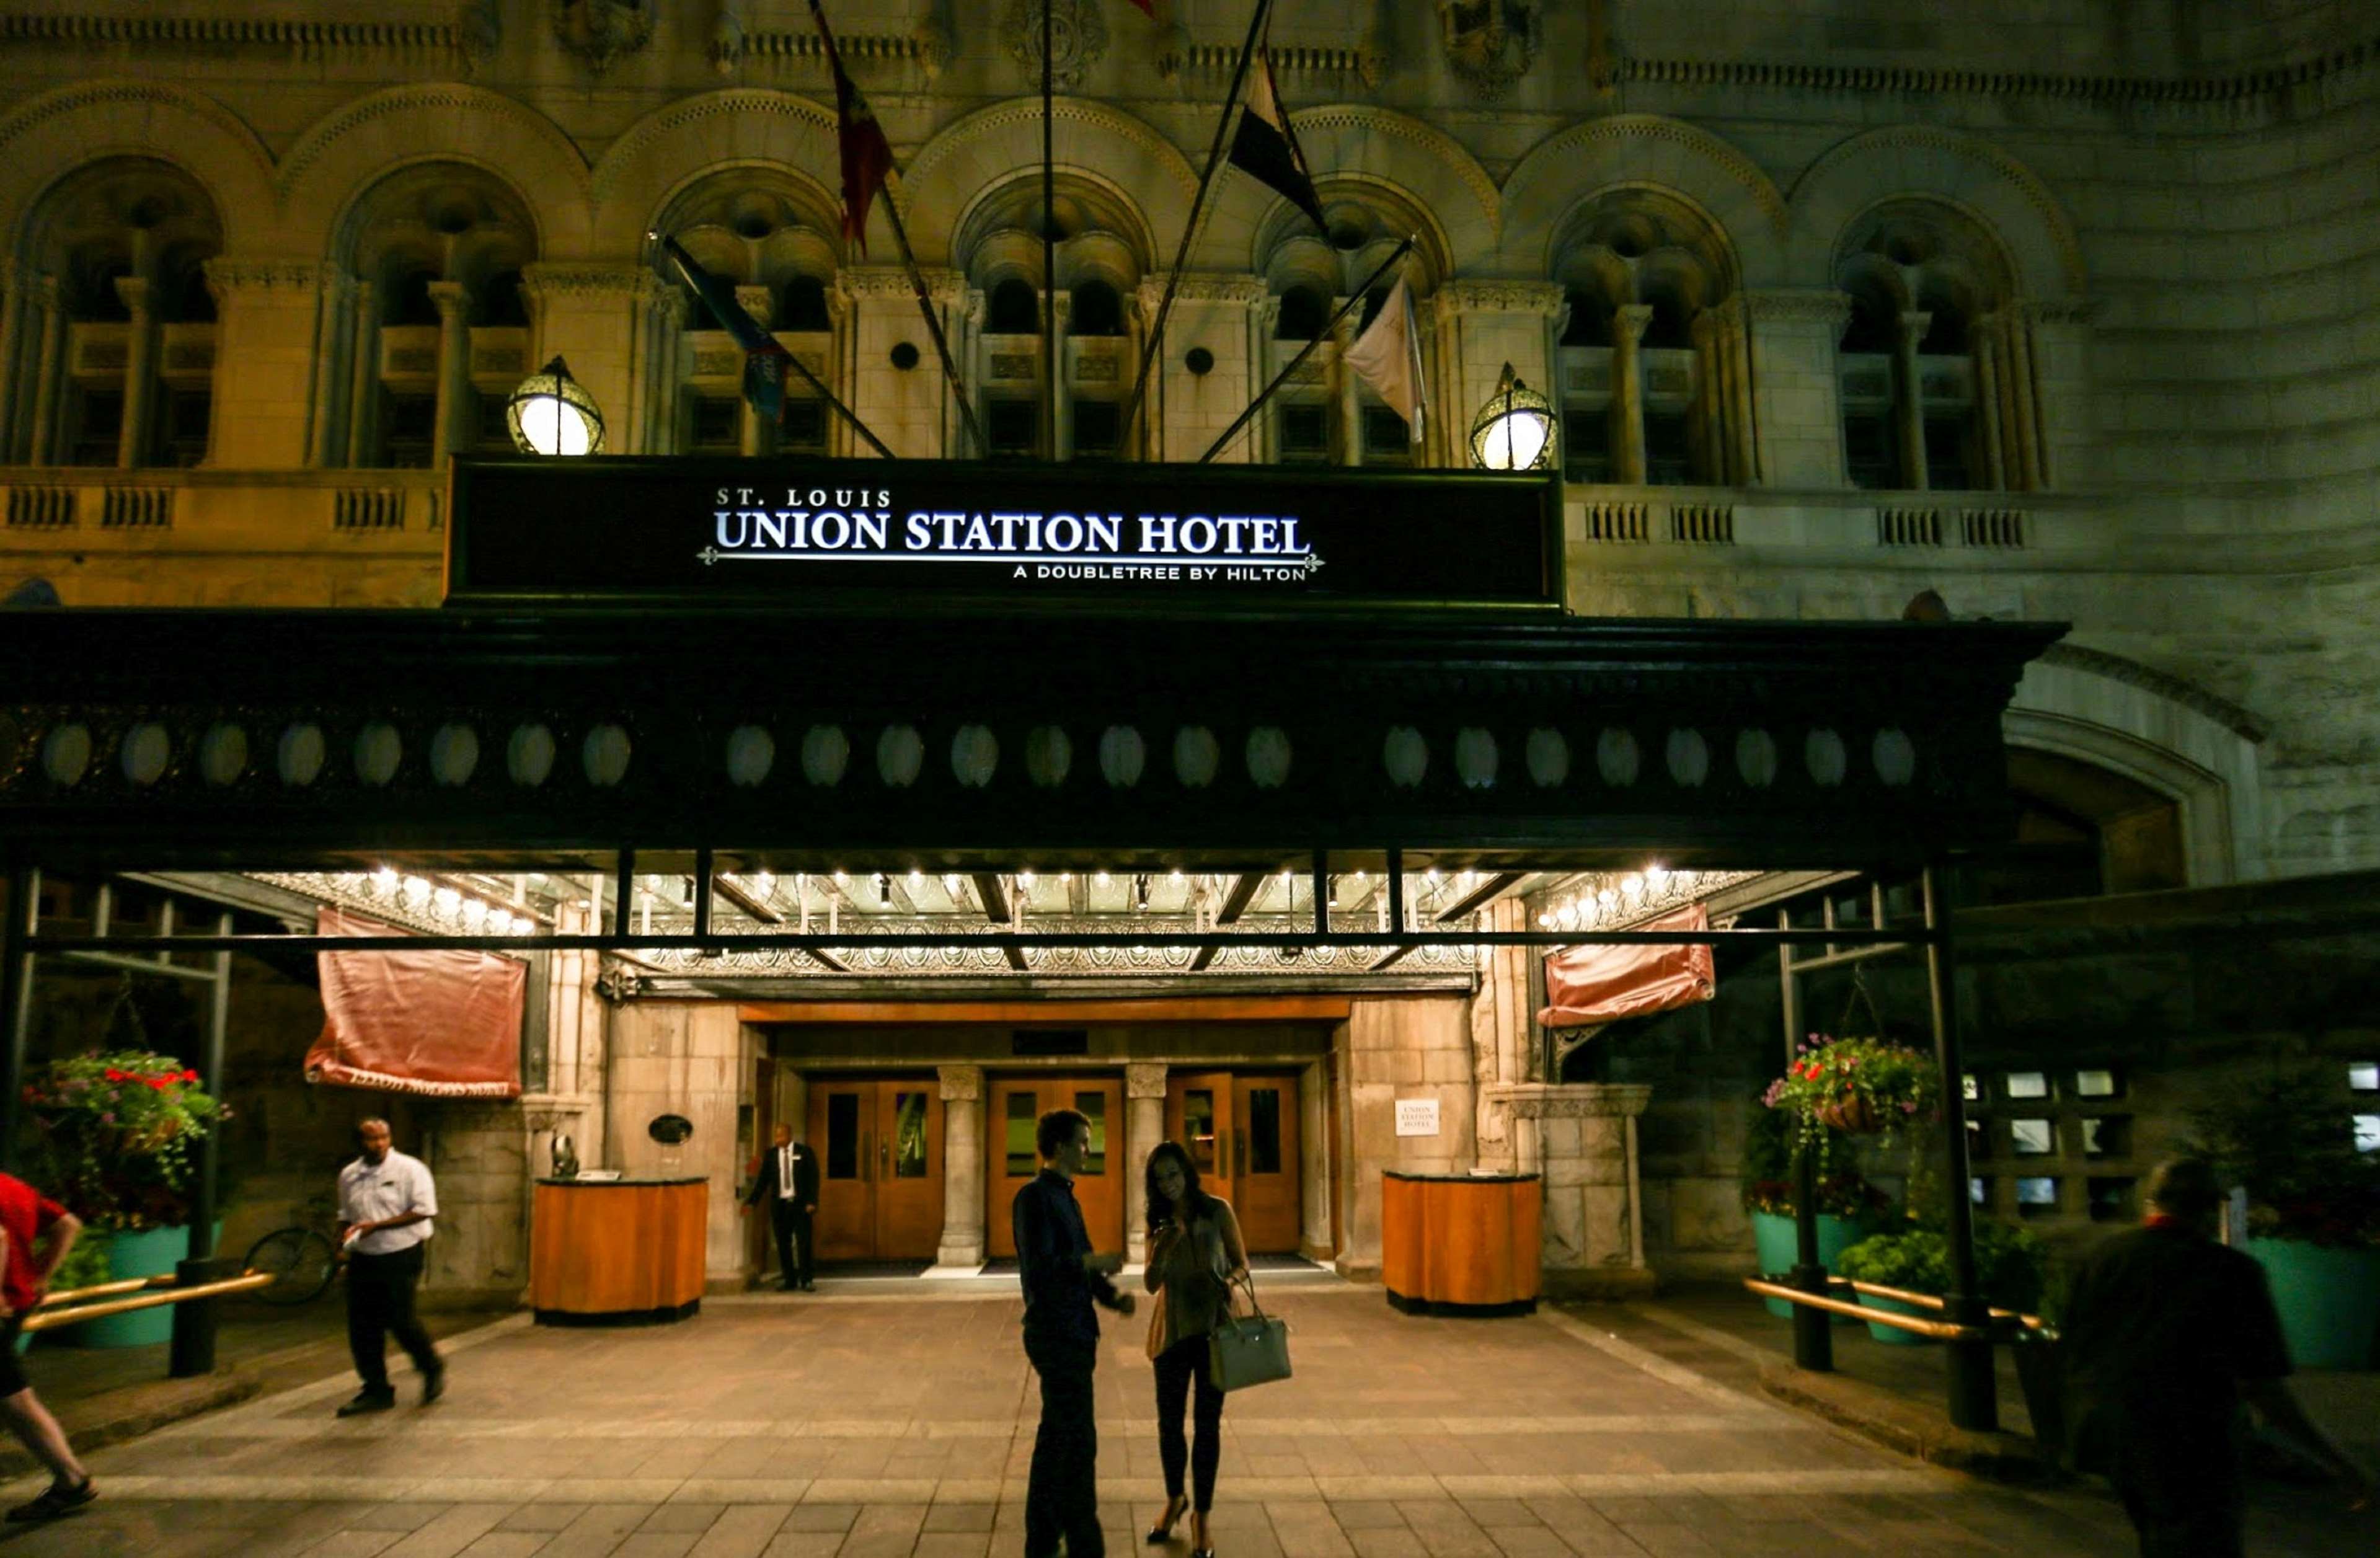 St. Louis Union Station Hotel, Curio Collection by Hilton Coupons St Louis MO near me | 8coupons